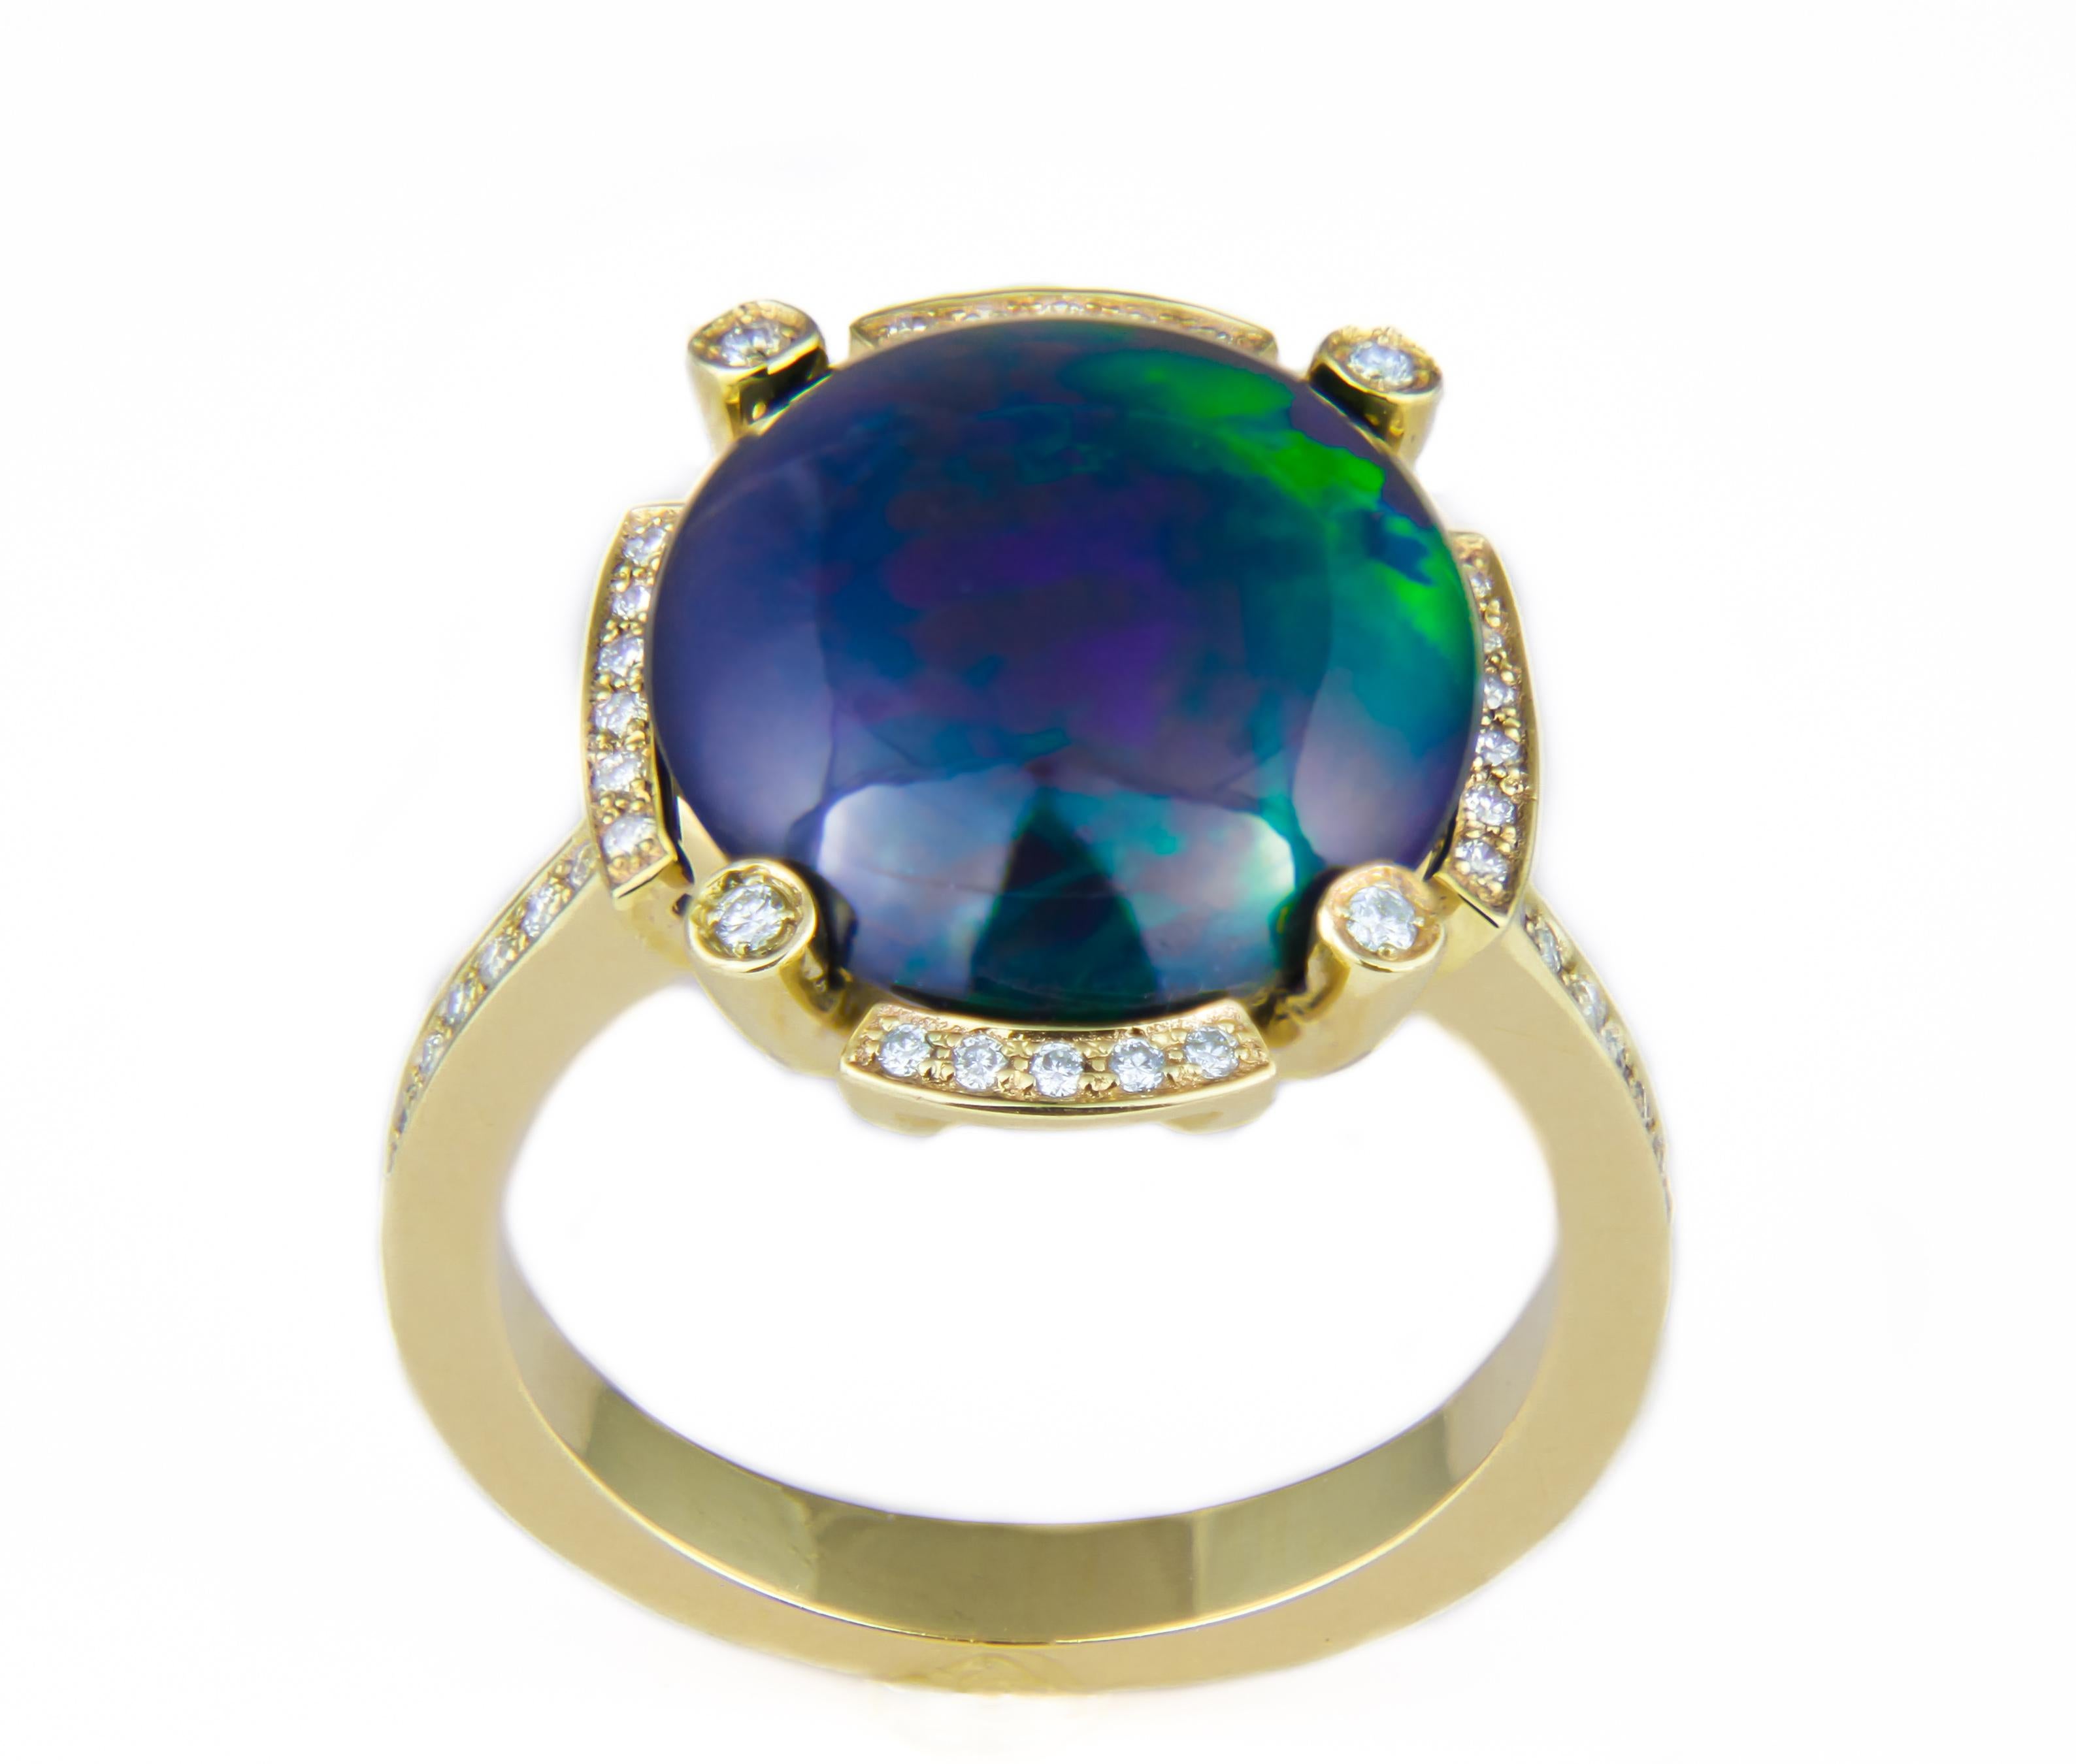 For Sale:  Black Opal and Diamonds Ring in 14k Gold. Gold Ring with Opal ! 5